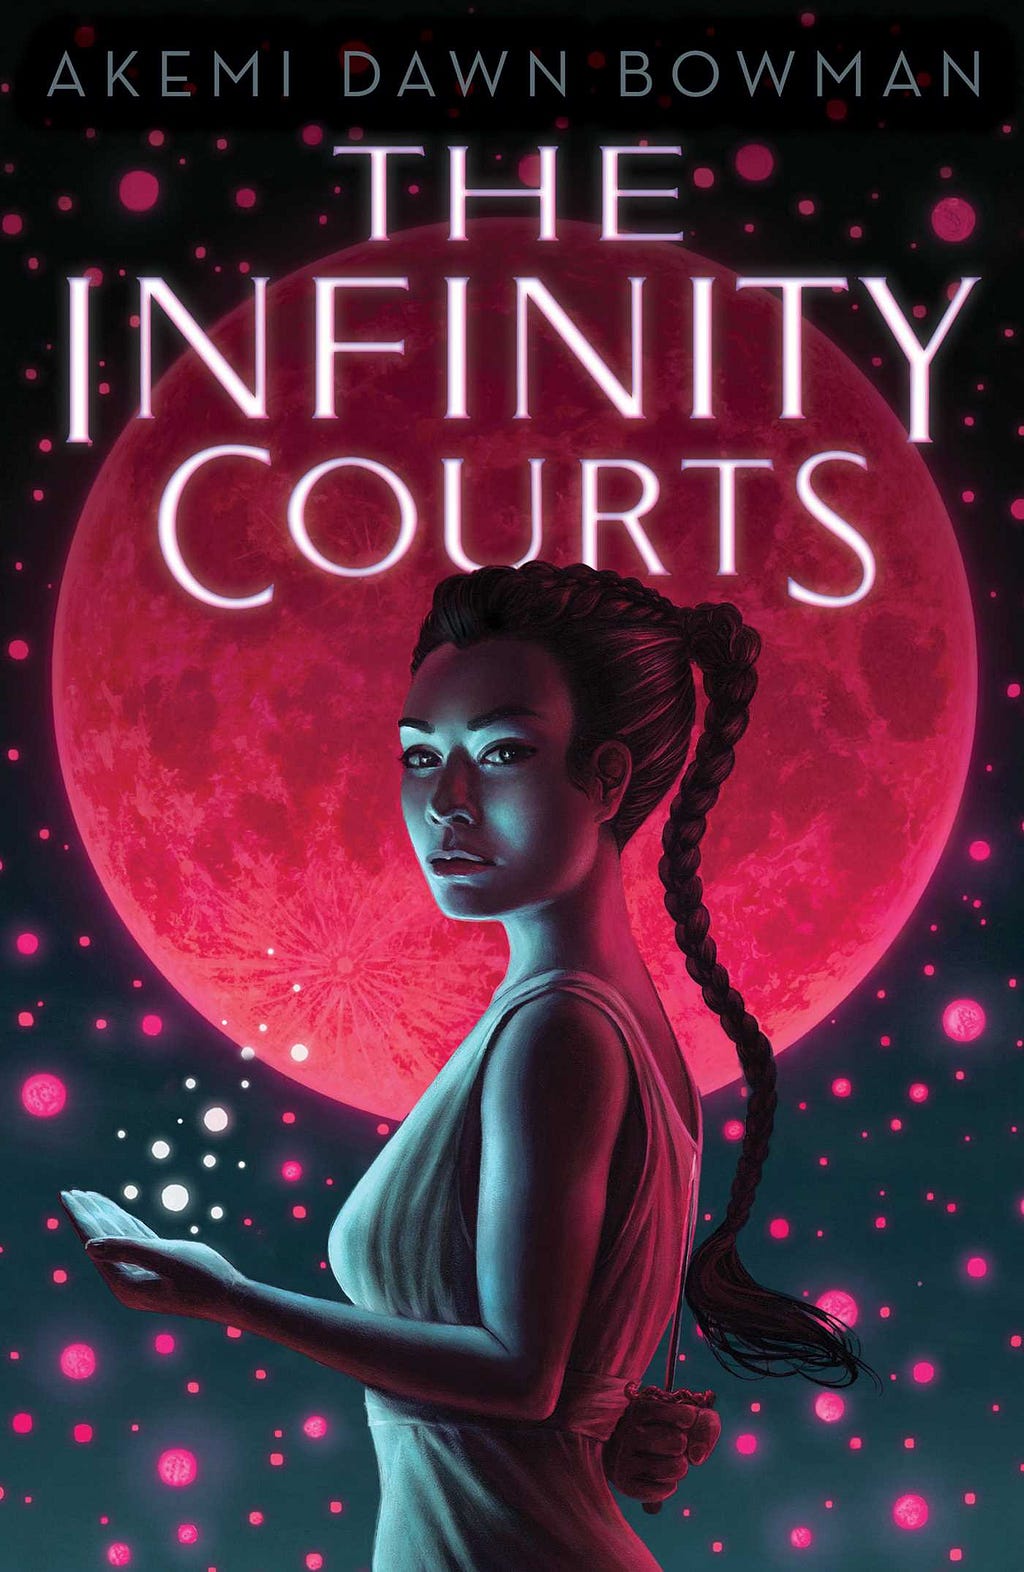 Book cover of The Infinity Courts by Akemi Dawn Bowman.